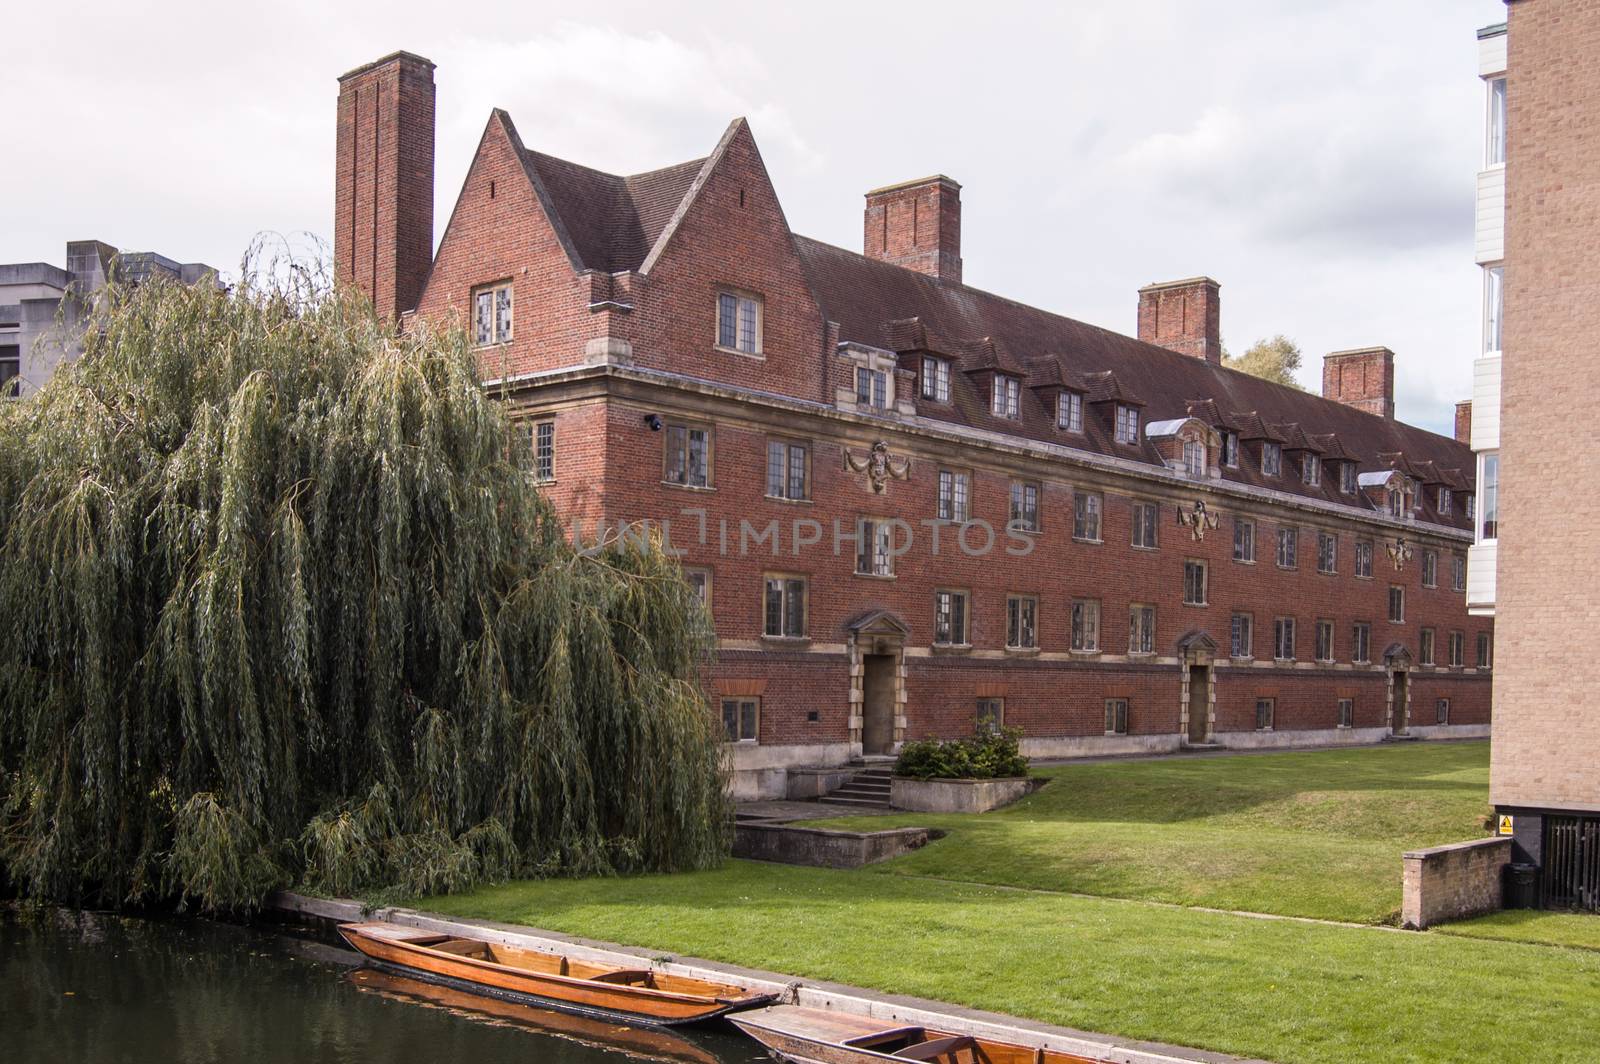 View of St John's College on the banks of the River Cam. Part of the University of Cambridge.